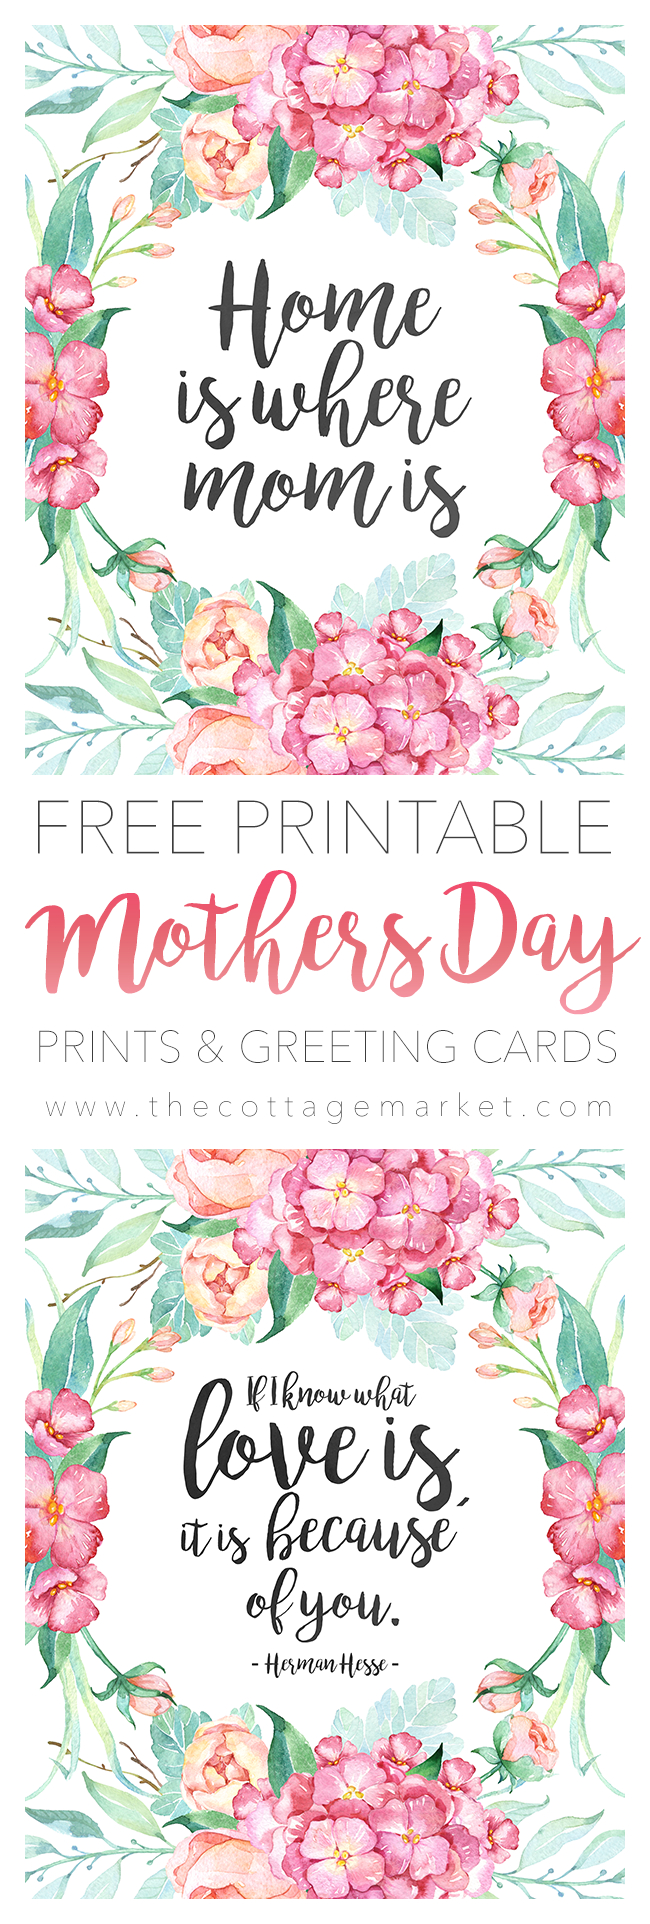 Free Printable Mother&amp;#039;s Day Cards - The Cottage Market - Free Printable Mothers Day Cards